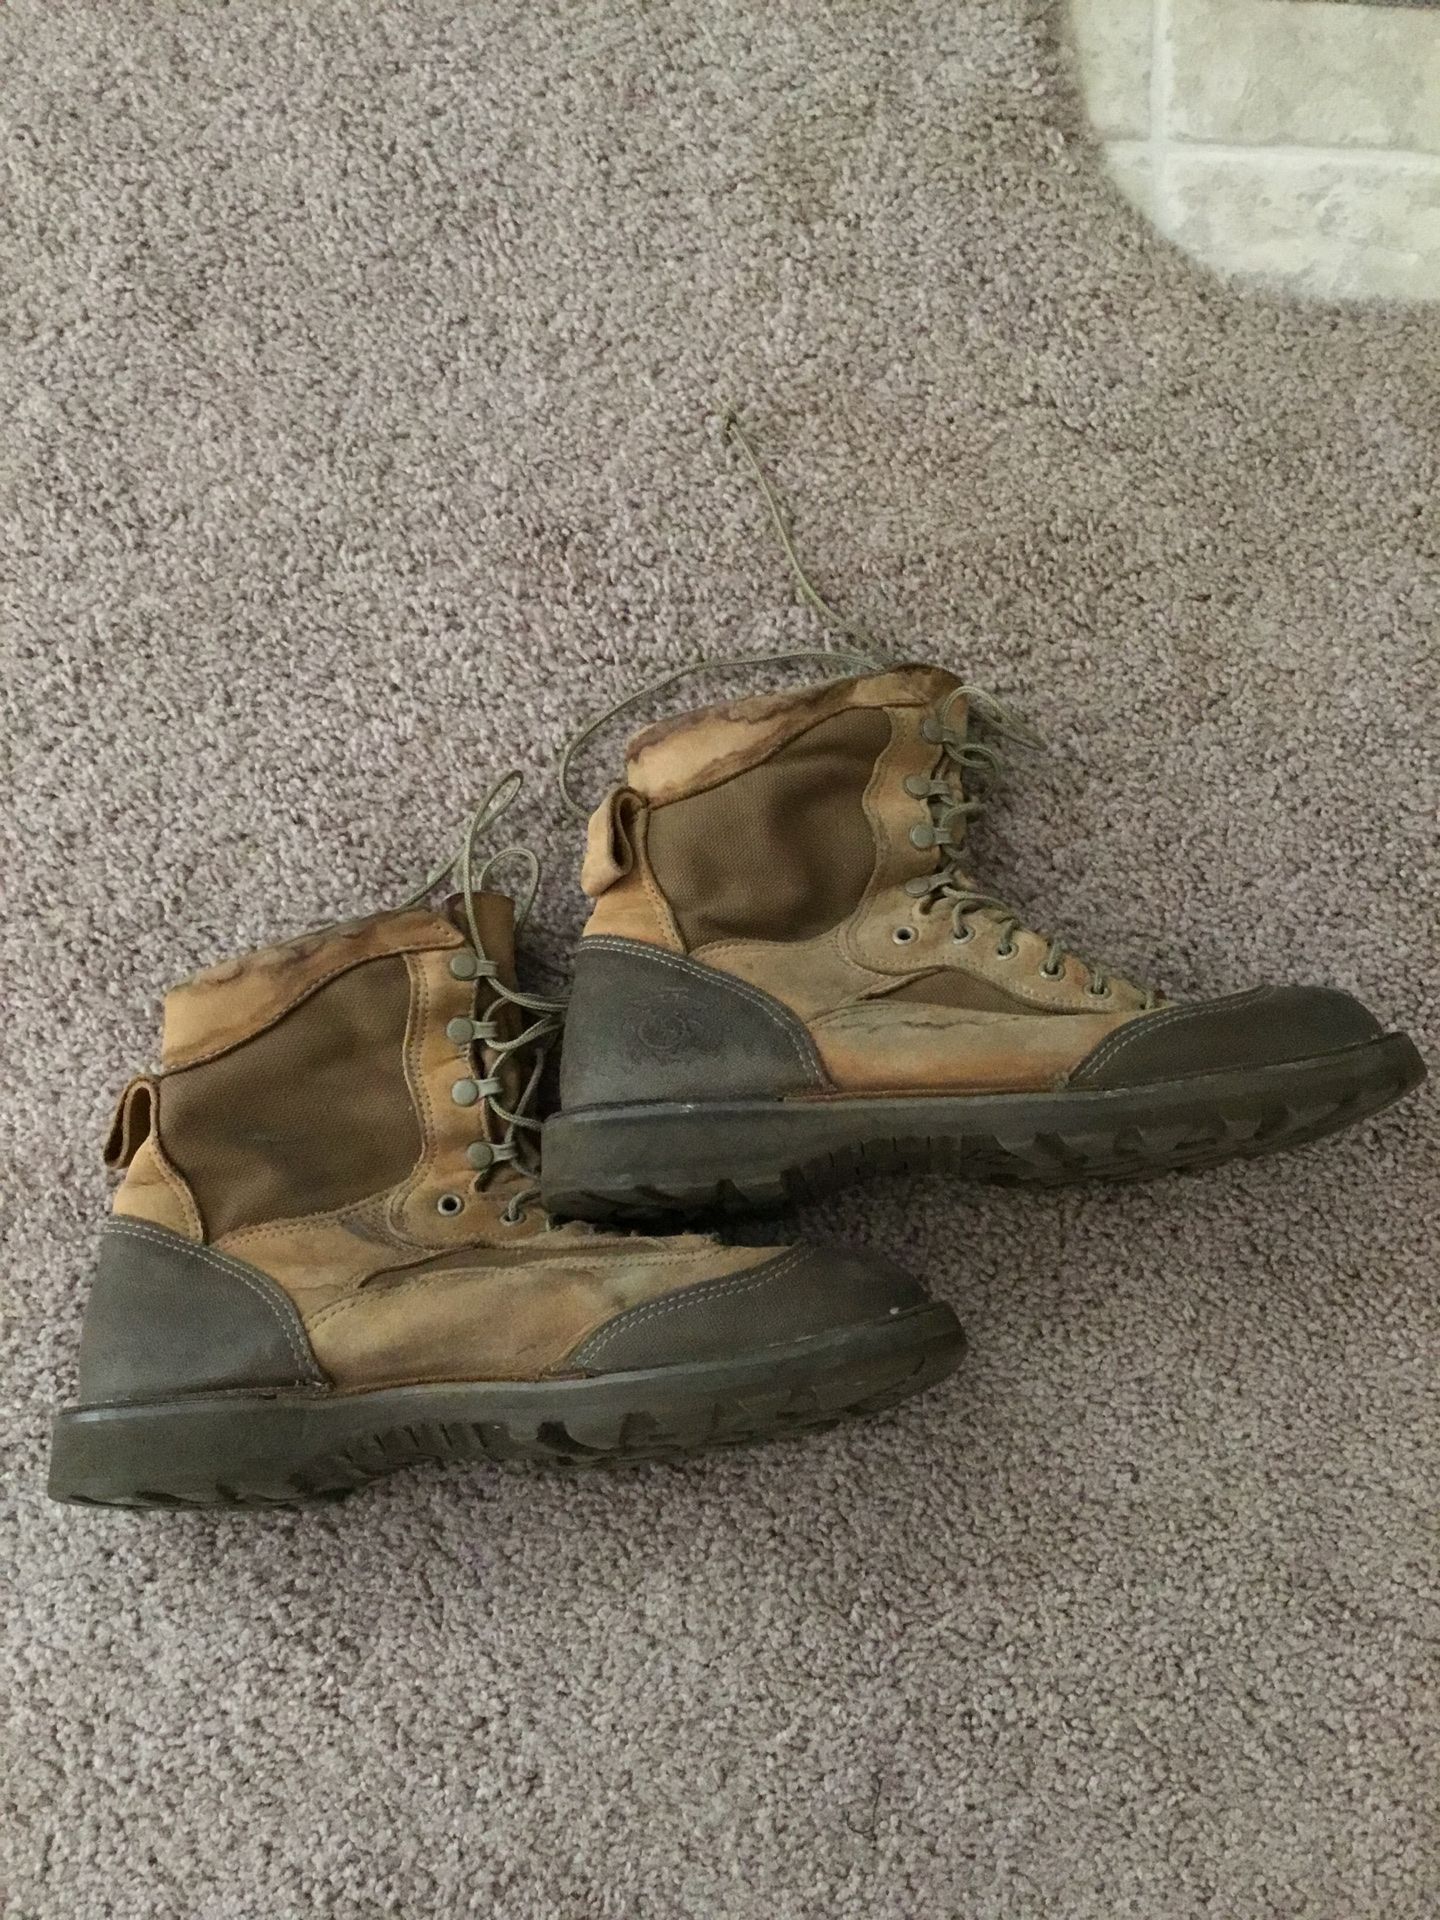 Marine corps Danner RAT boots size (10 wide